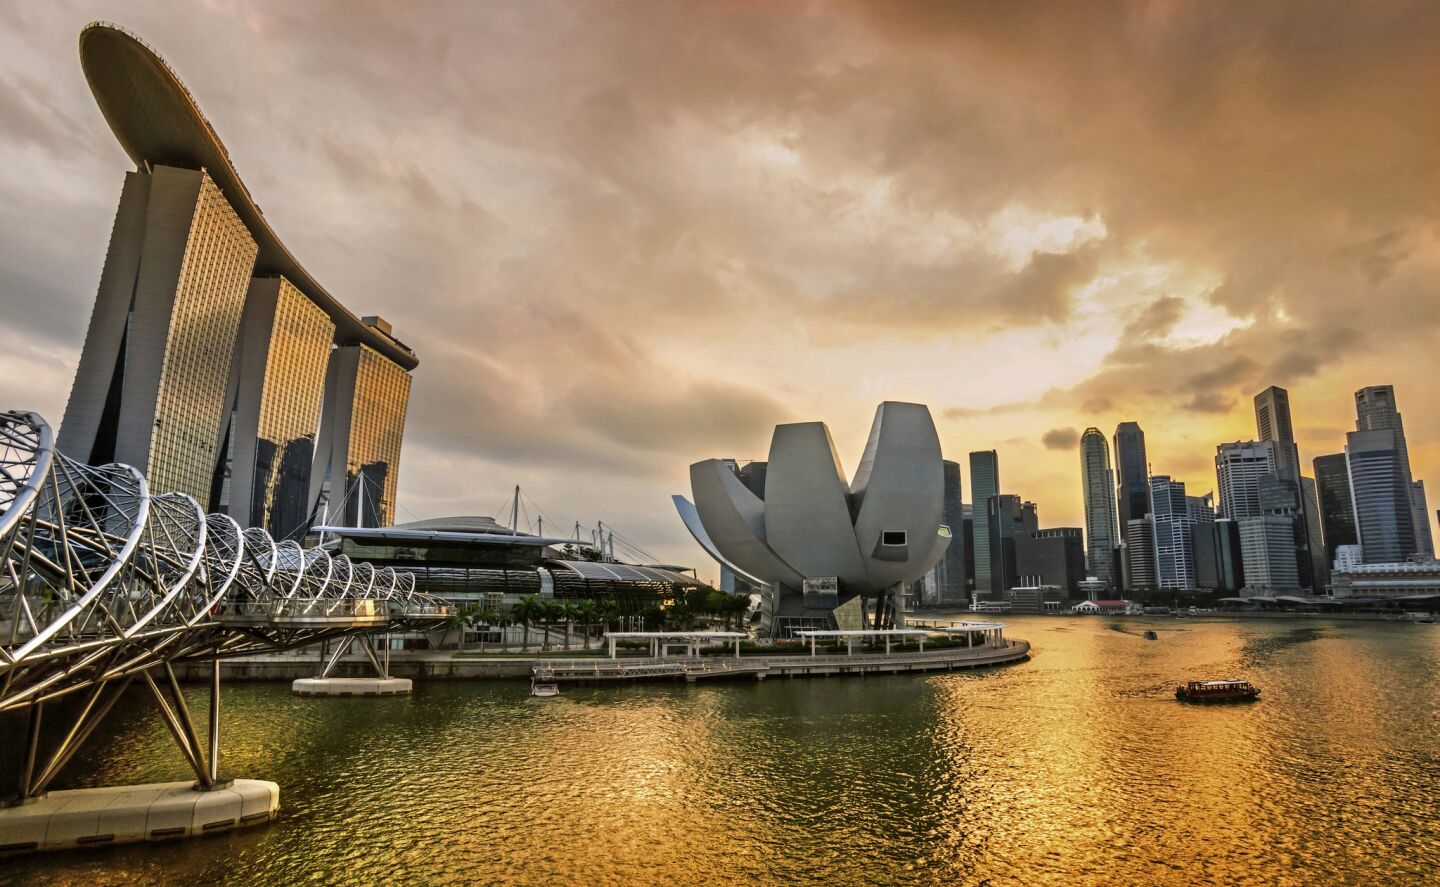 The dramatic Singapore city skyline at sunset, with the striking Marina Bay Sands Hotel to the left, three towers with a Skypark atop them. On Aug. 9, 2015, Singapore celebrates its golden jubilee.